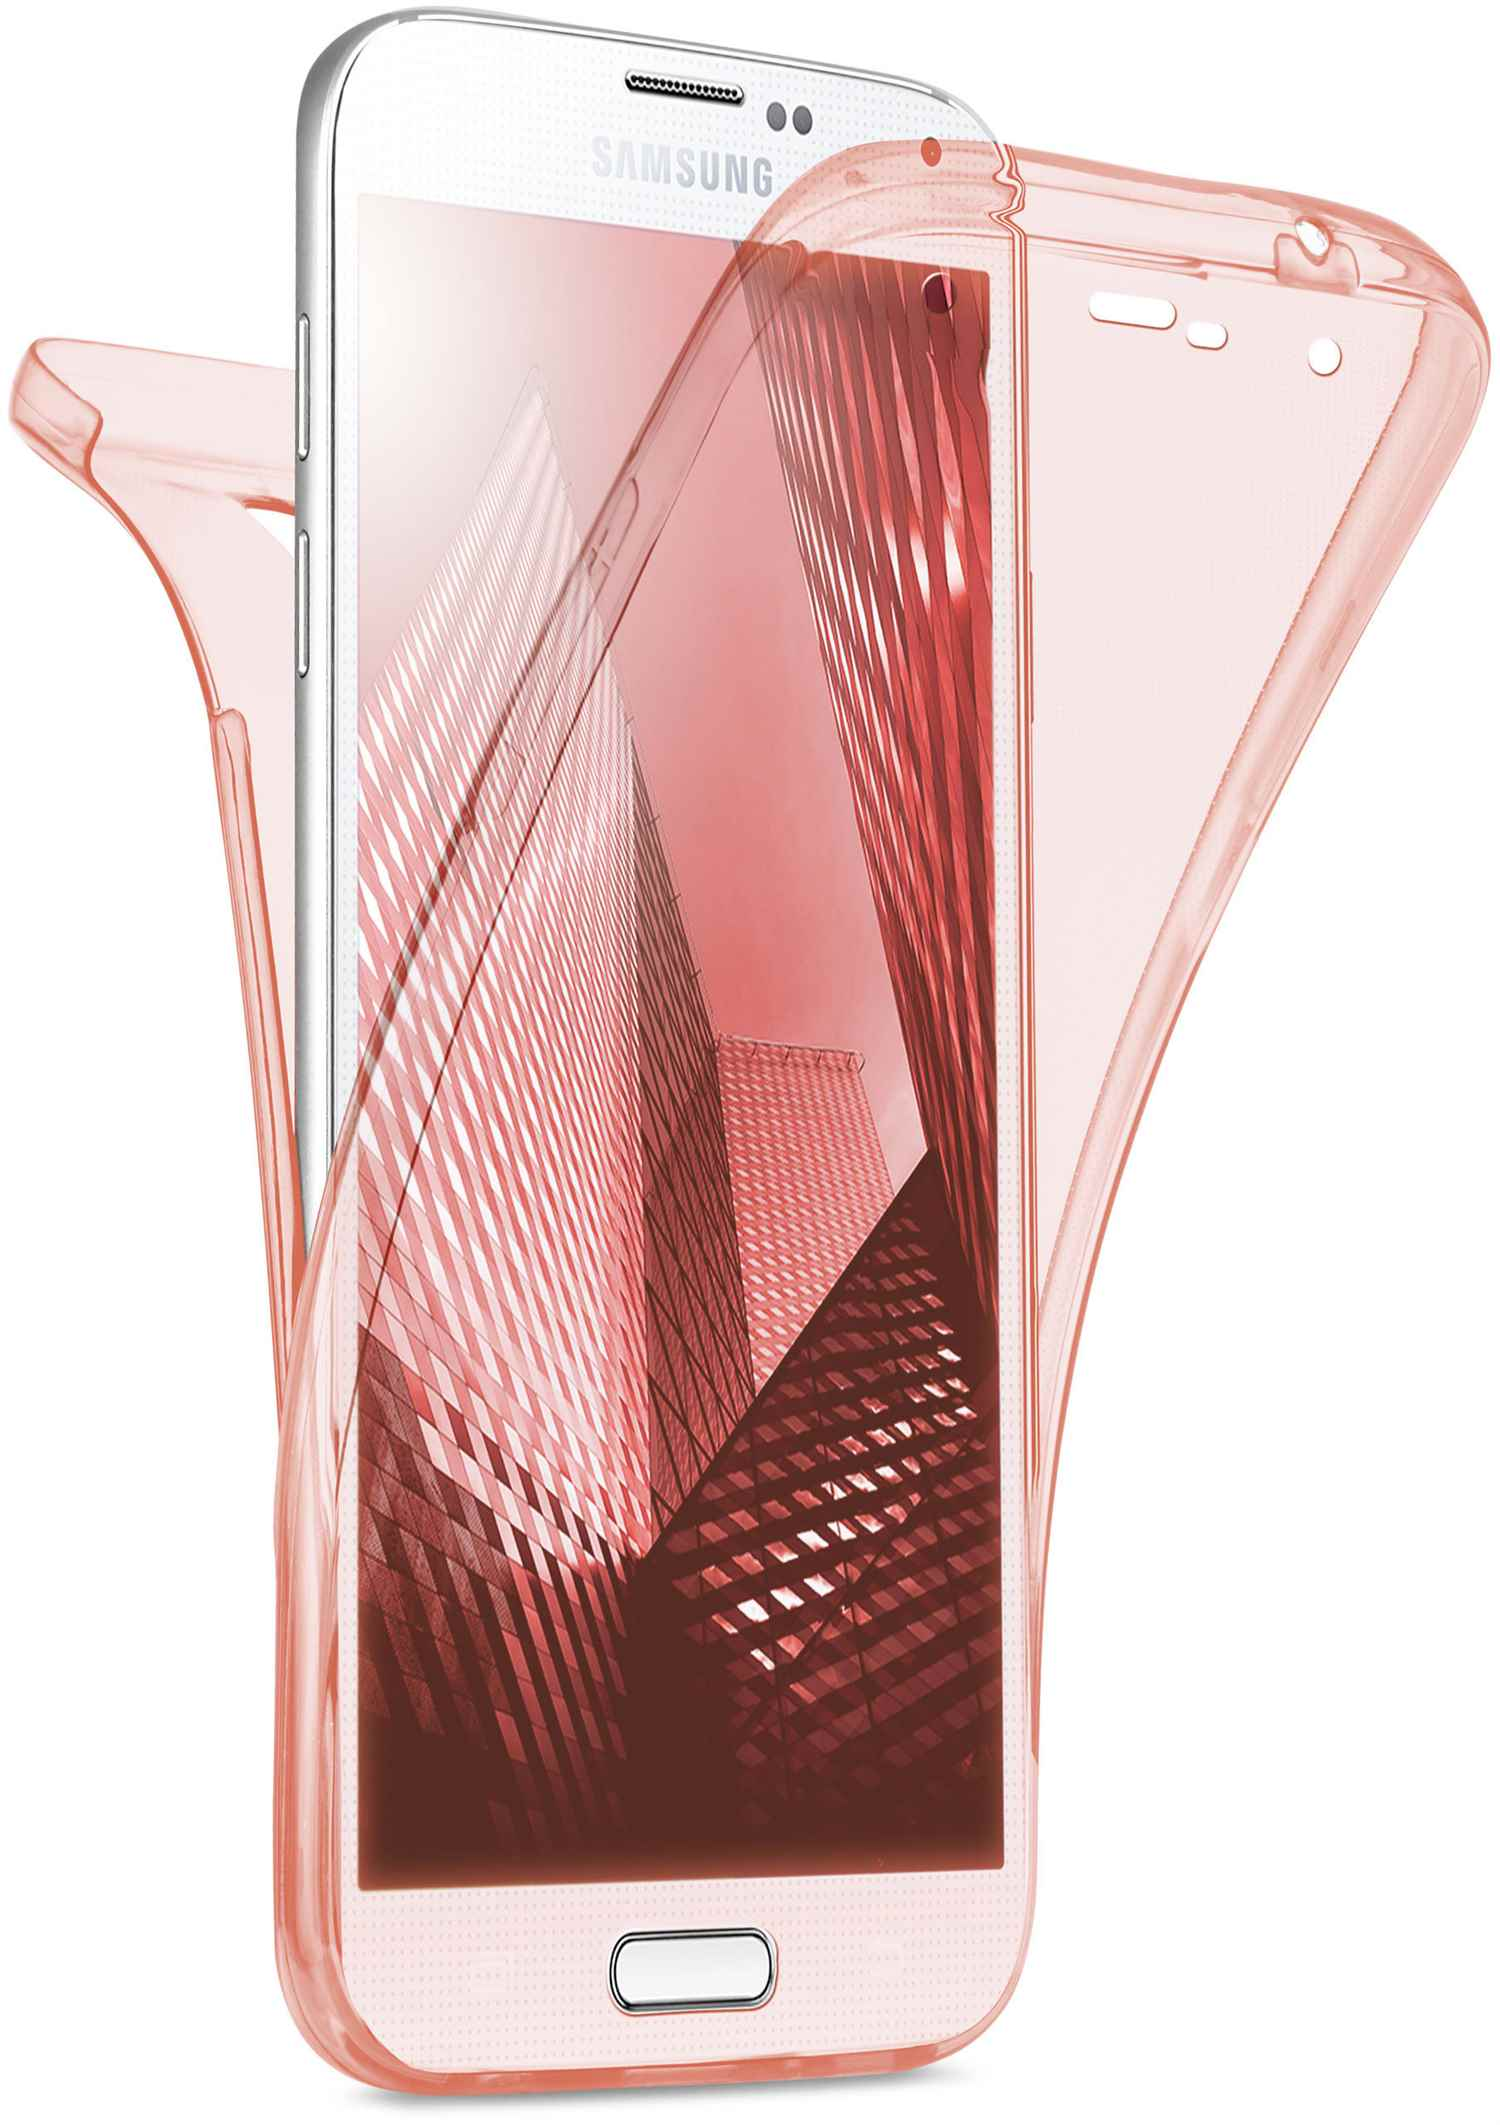 MOEX Double S5 Rose Cover, Neo, Samsung, Case, Full Galaxy